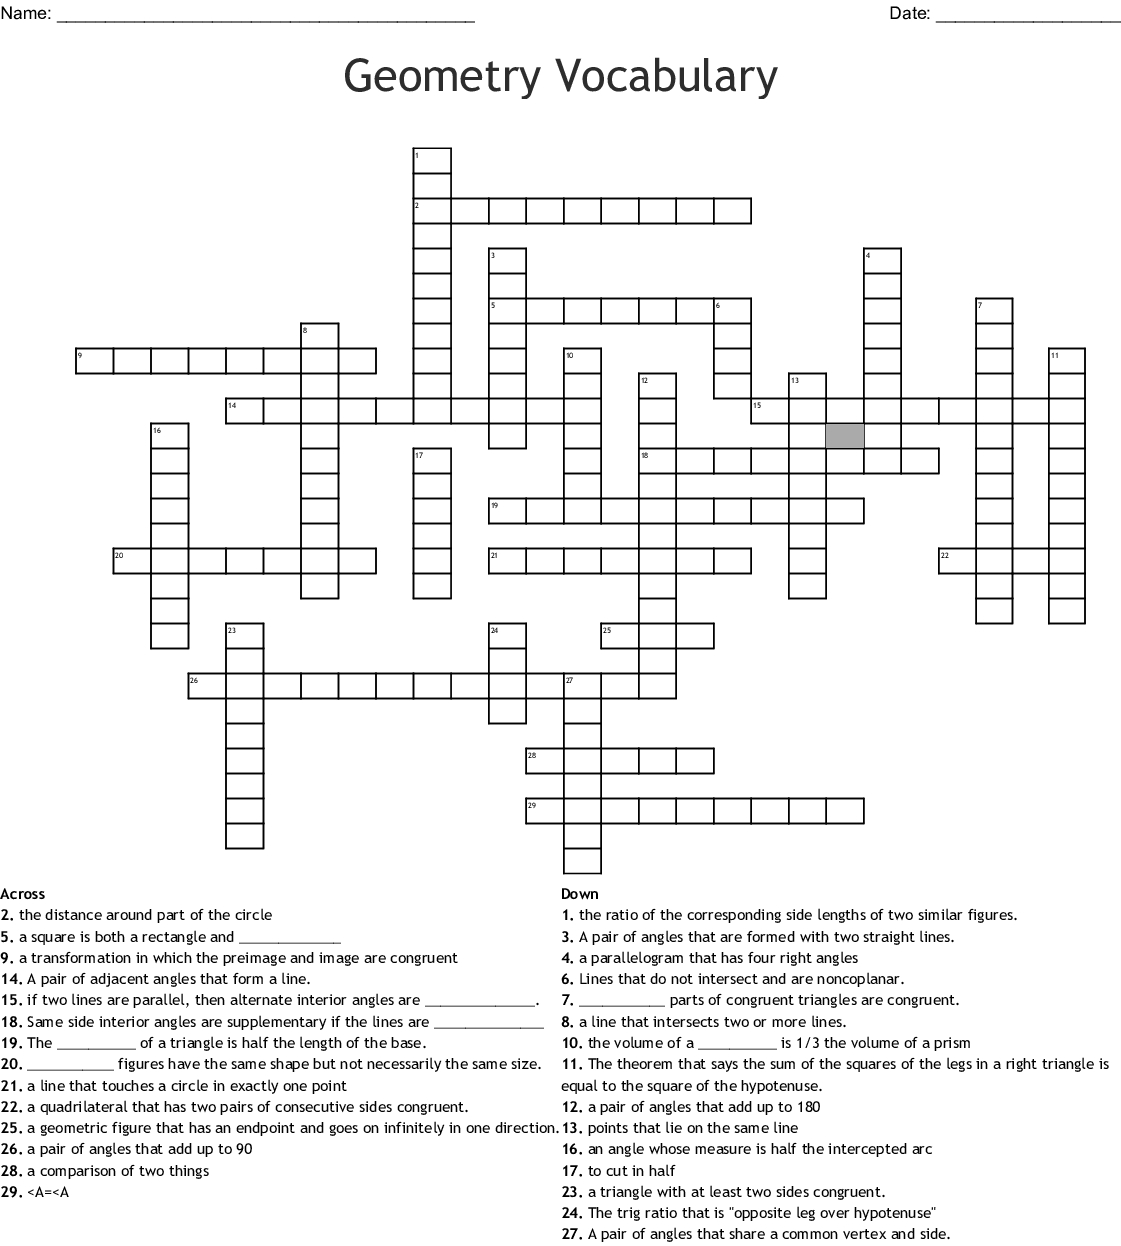 Geometry Chapter 1 Vocabulary Crossword Tools Of Geometry Math